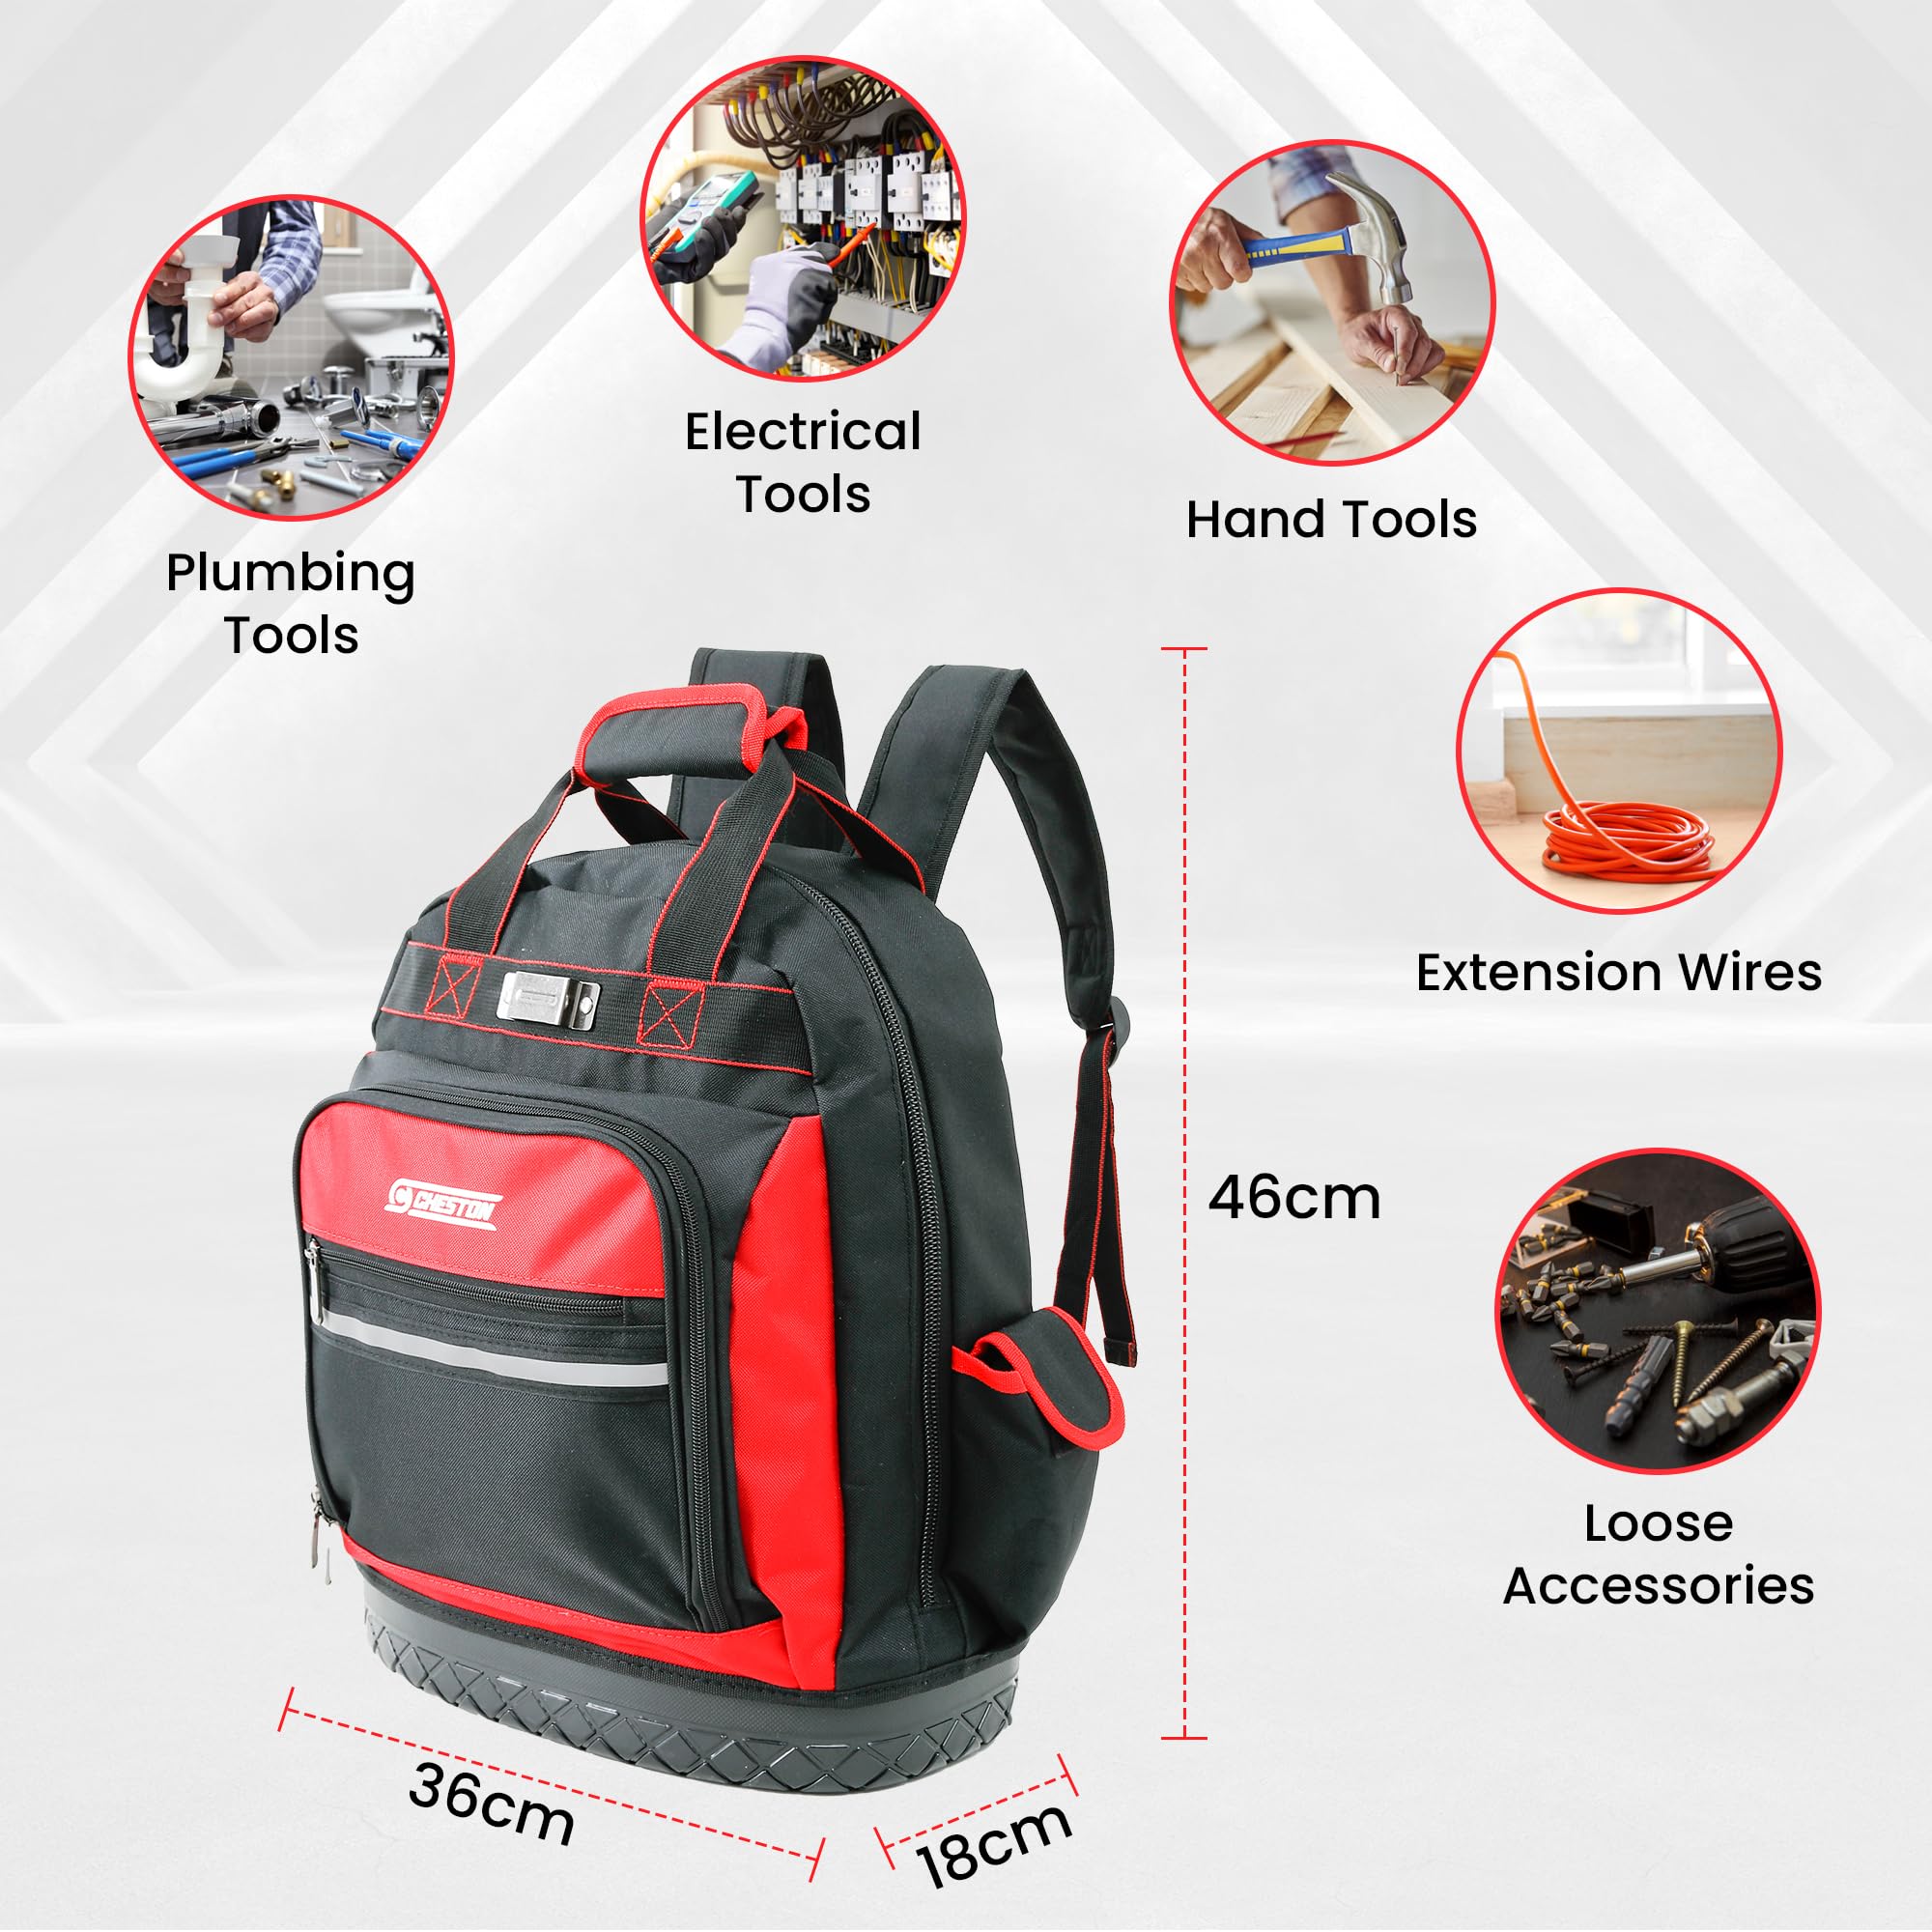 Cheston Ultra Tool Bag Backpack | Tool Organiser 50+ Multiple Compartments for Tools and Padded Handles | 15 kg Load Capacity I Heavy Duty & Water proof I For Professional Plumber Electricians